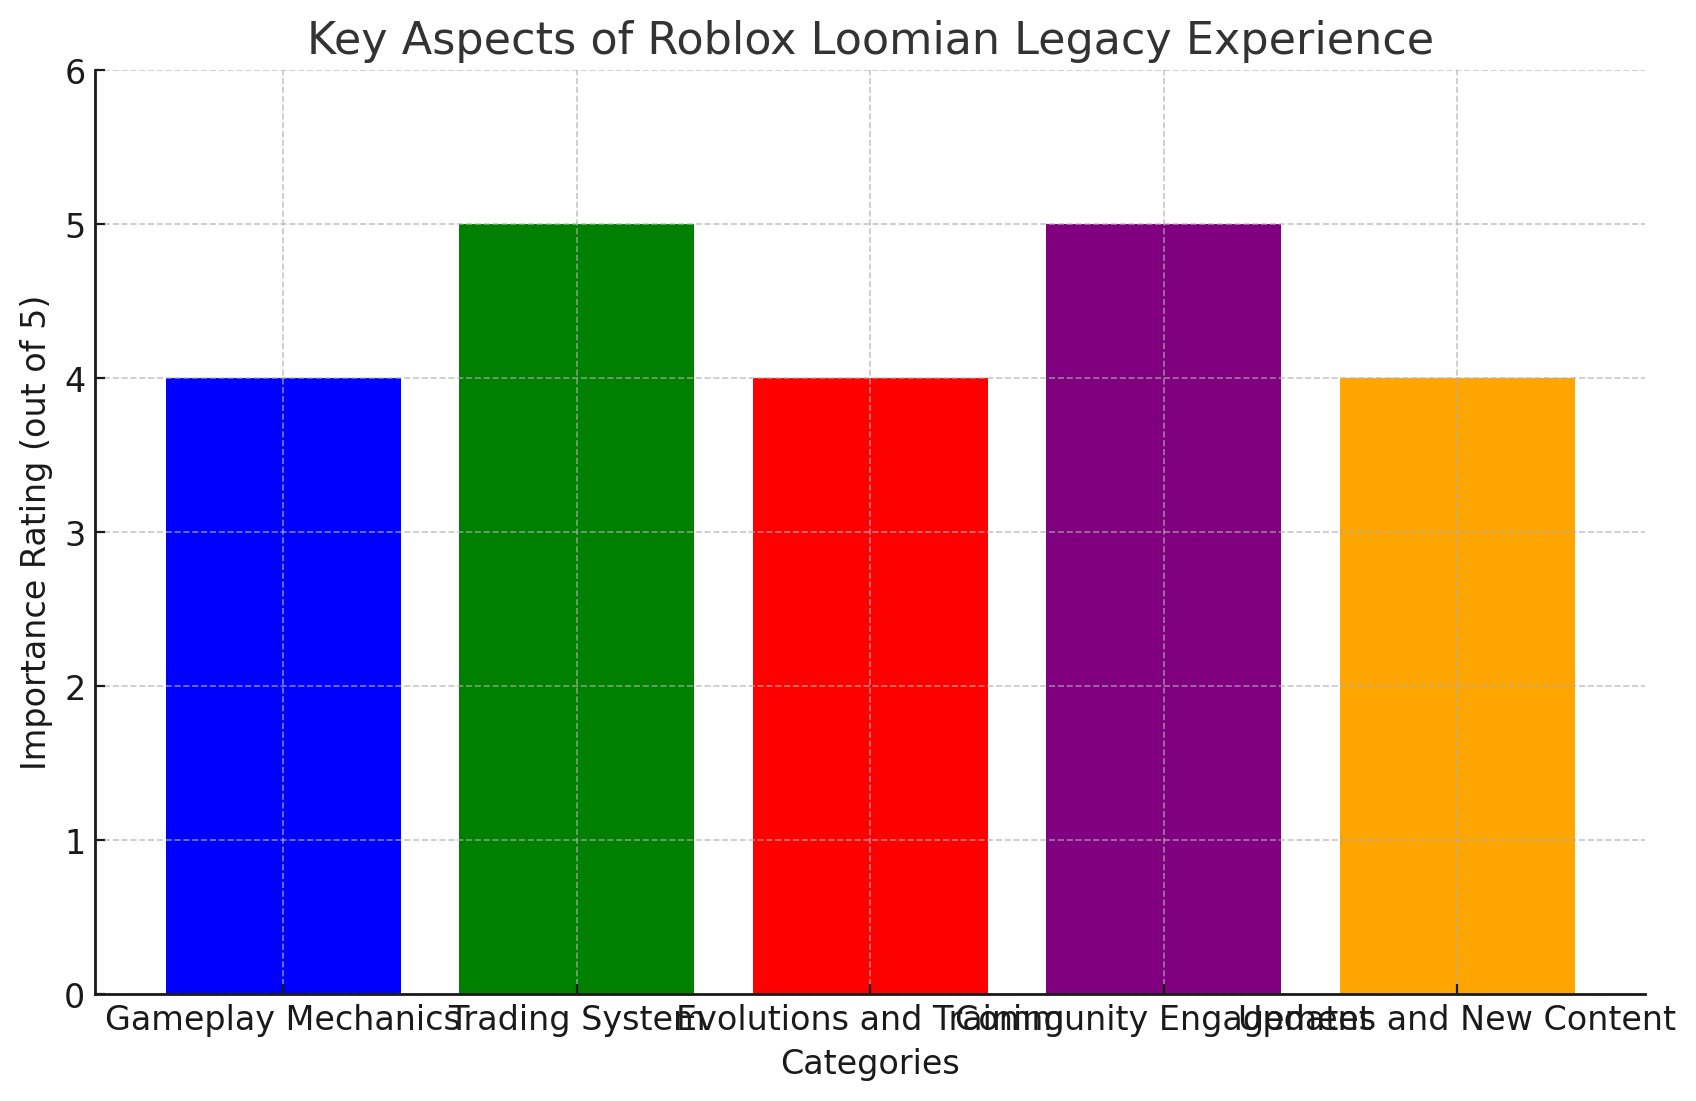 Roblox Loomian Legacy game aspects